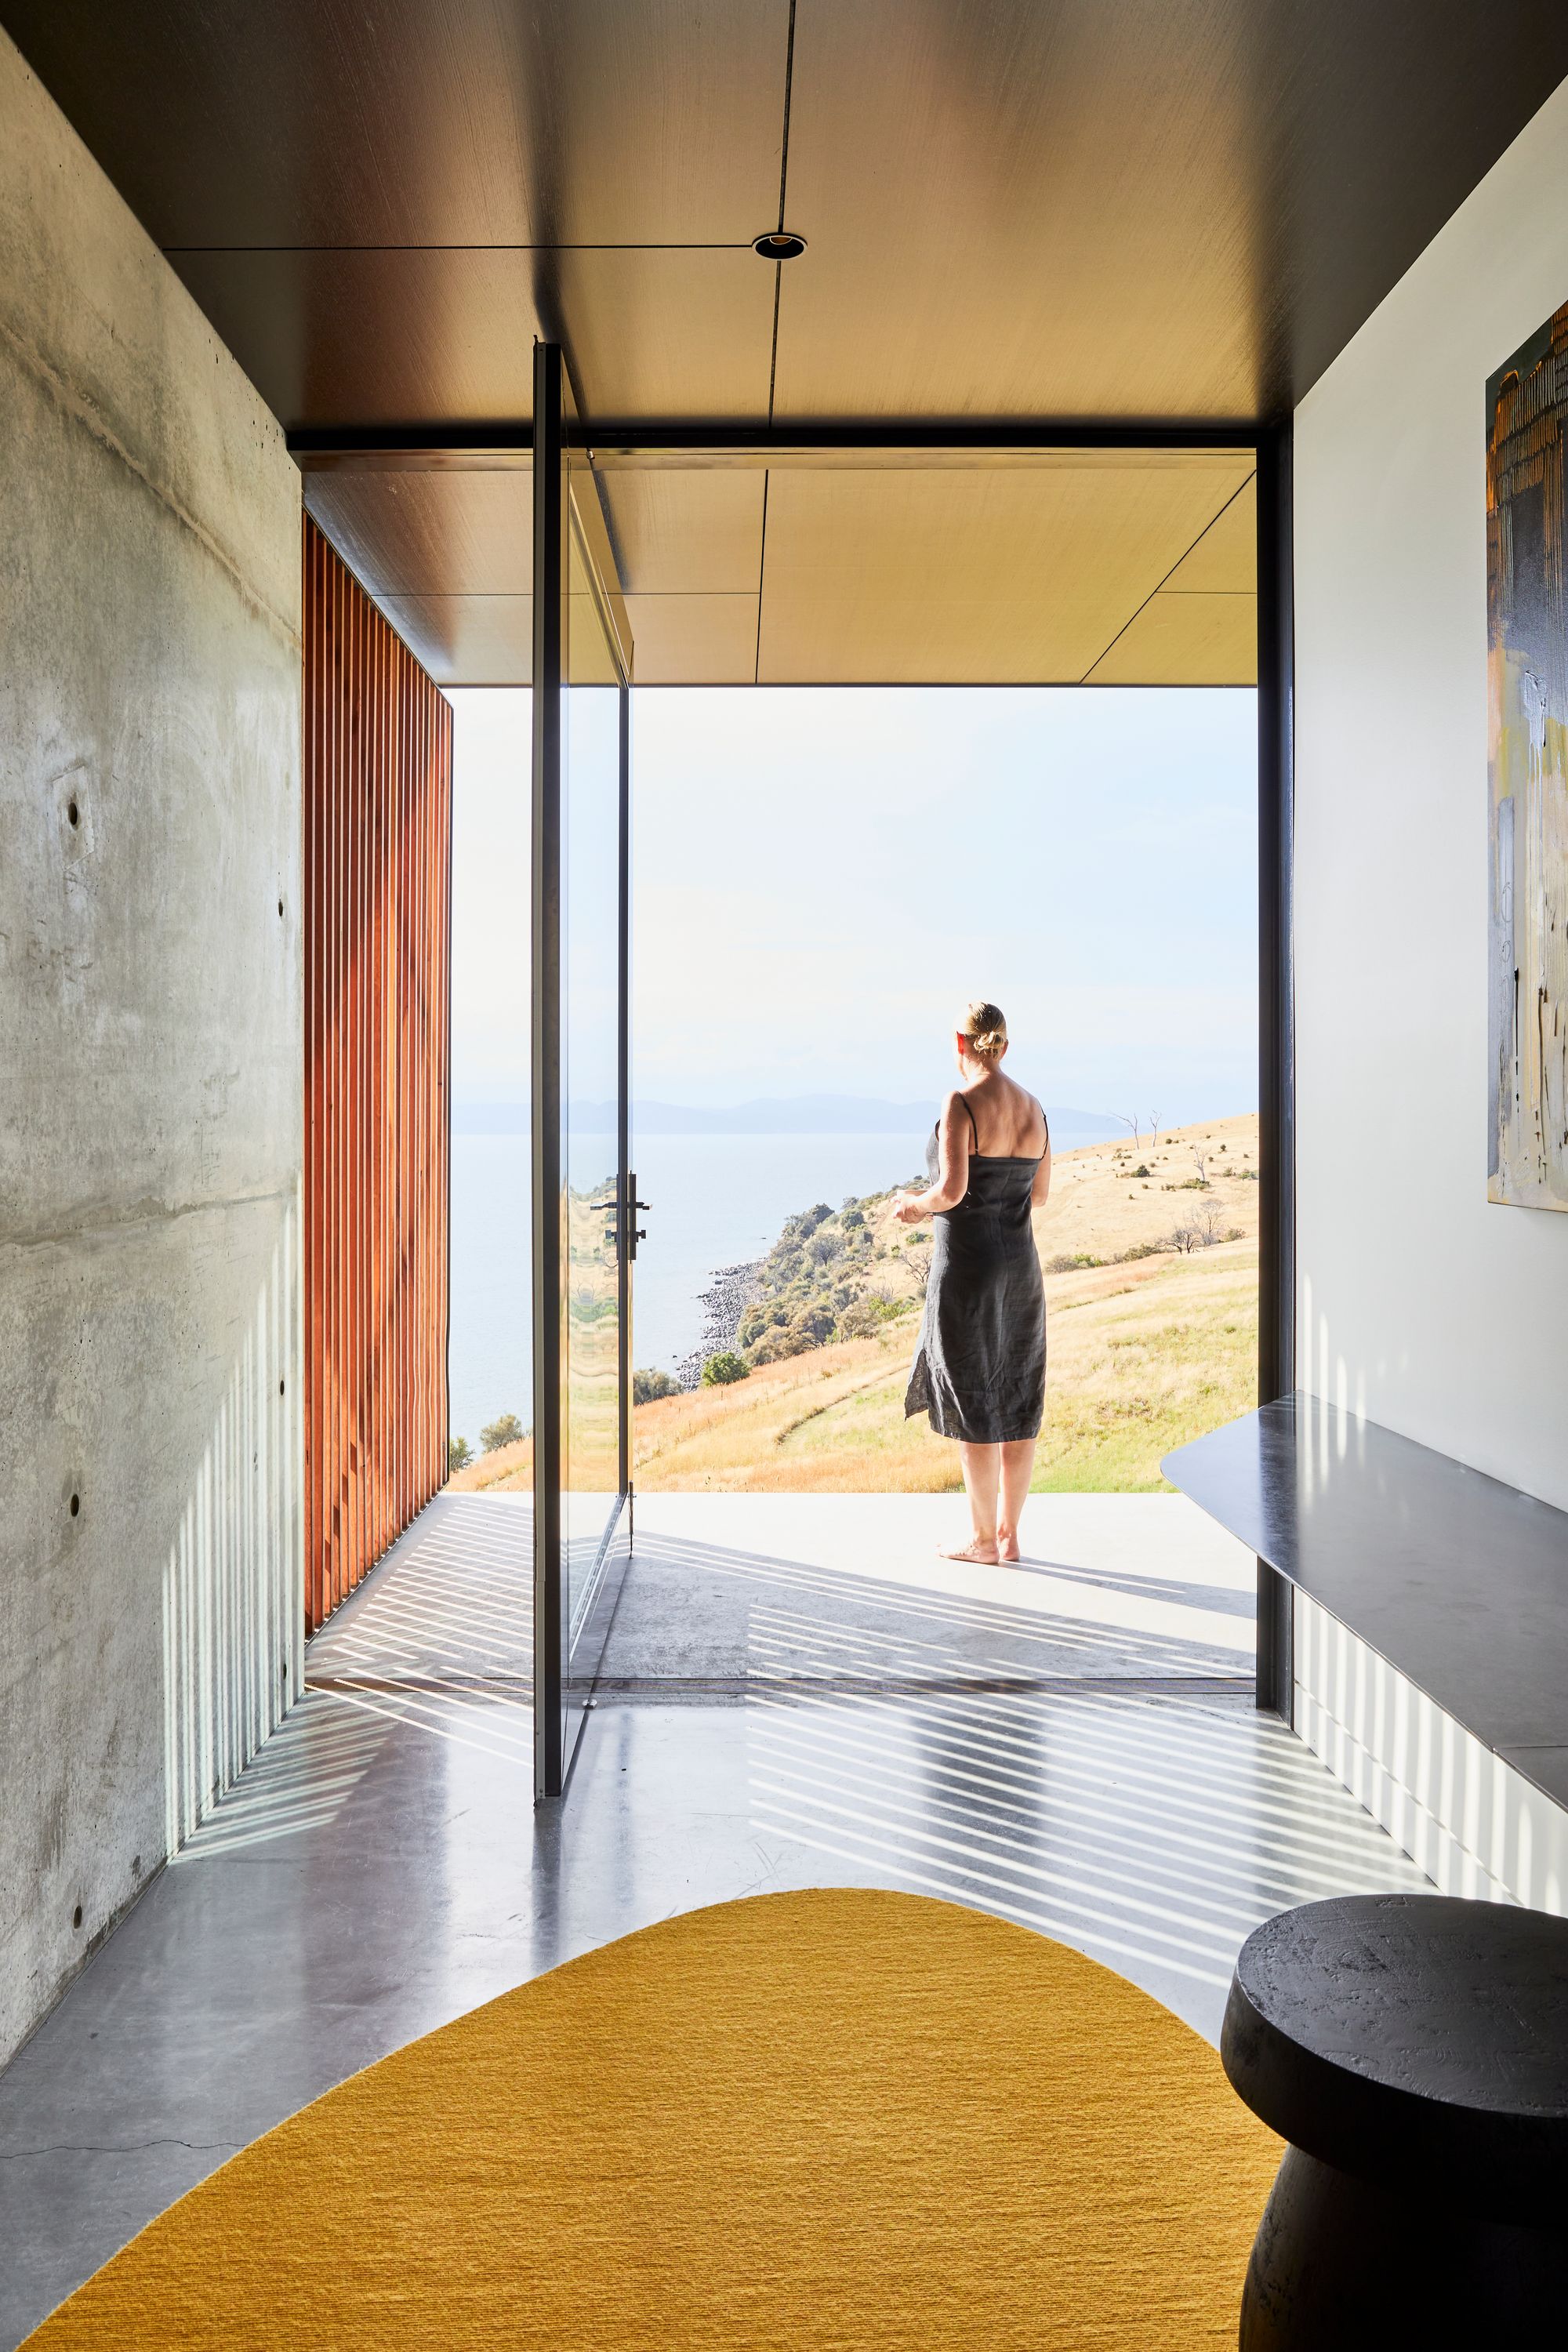 The Point Tasmania. View form entryway, door opening out to surrounding landscape